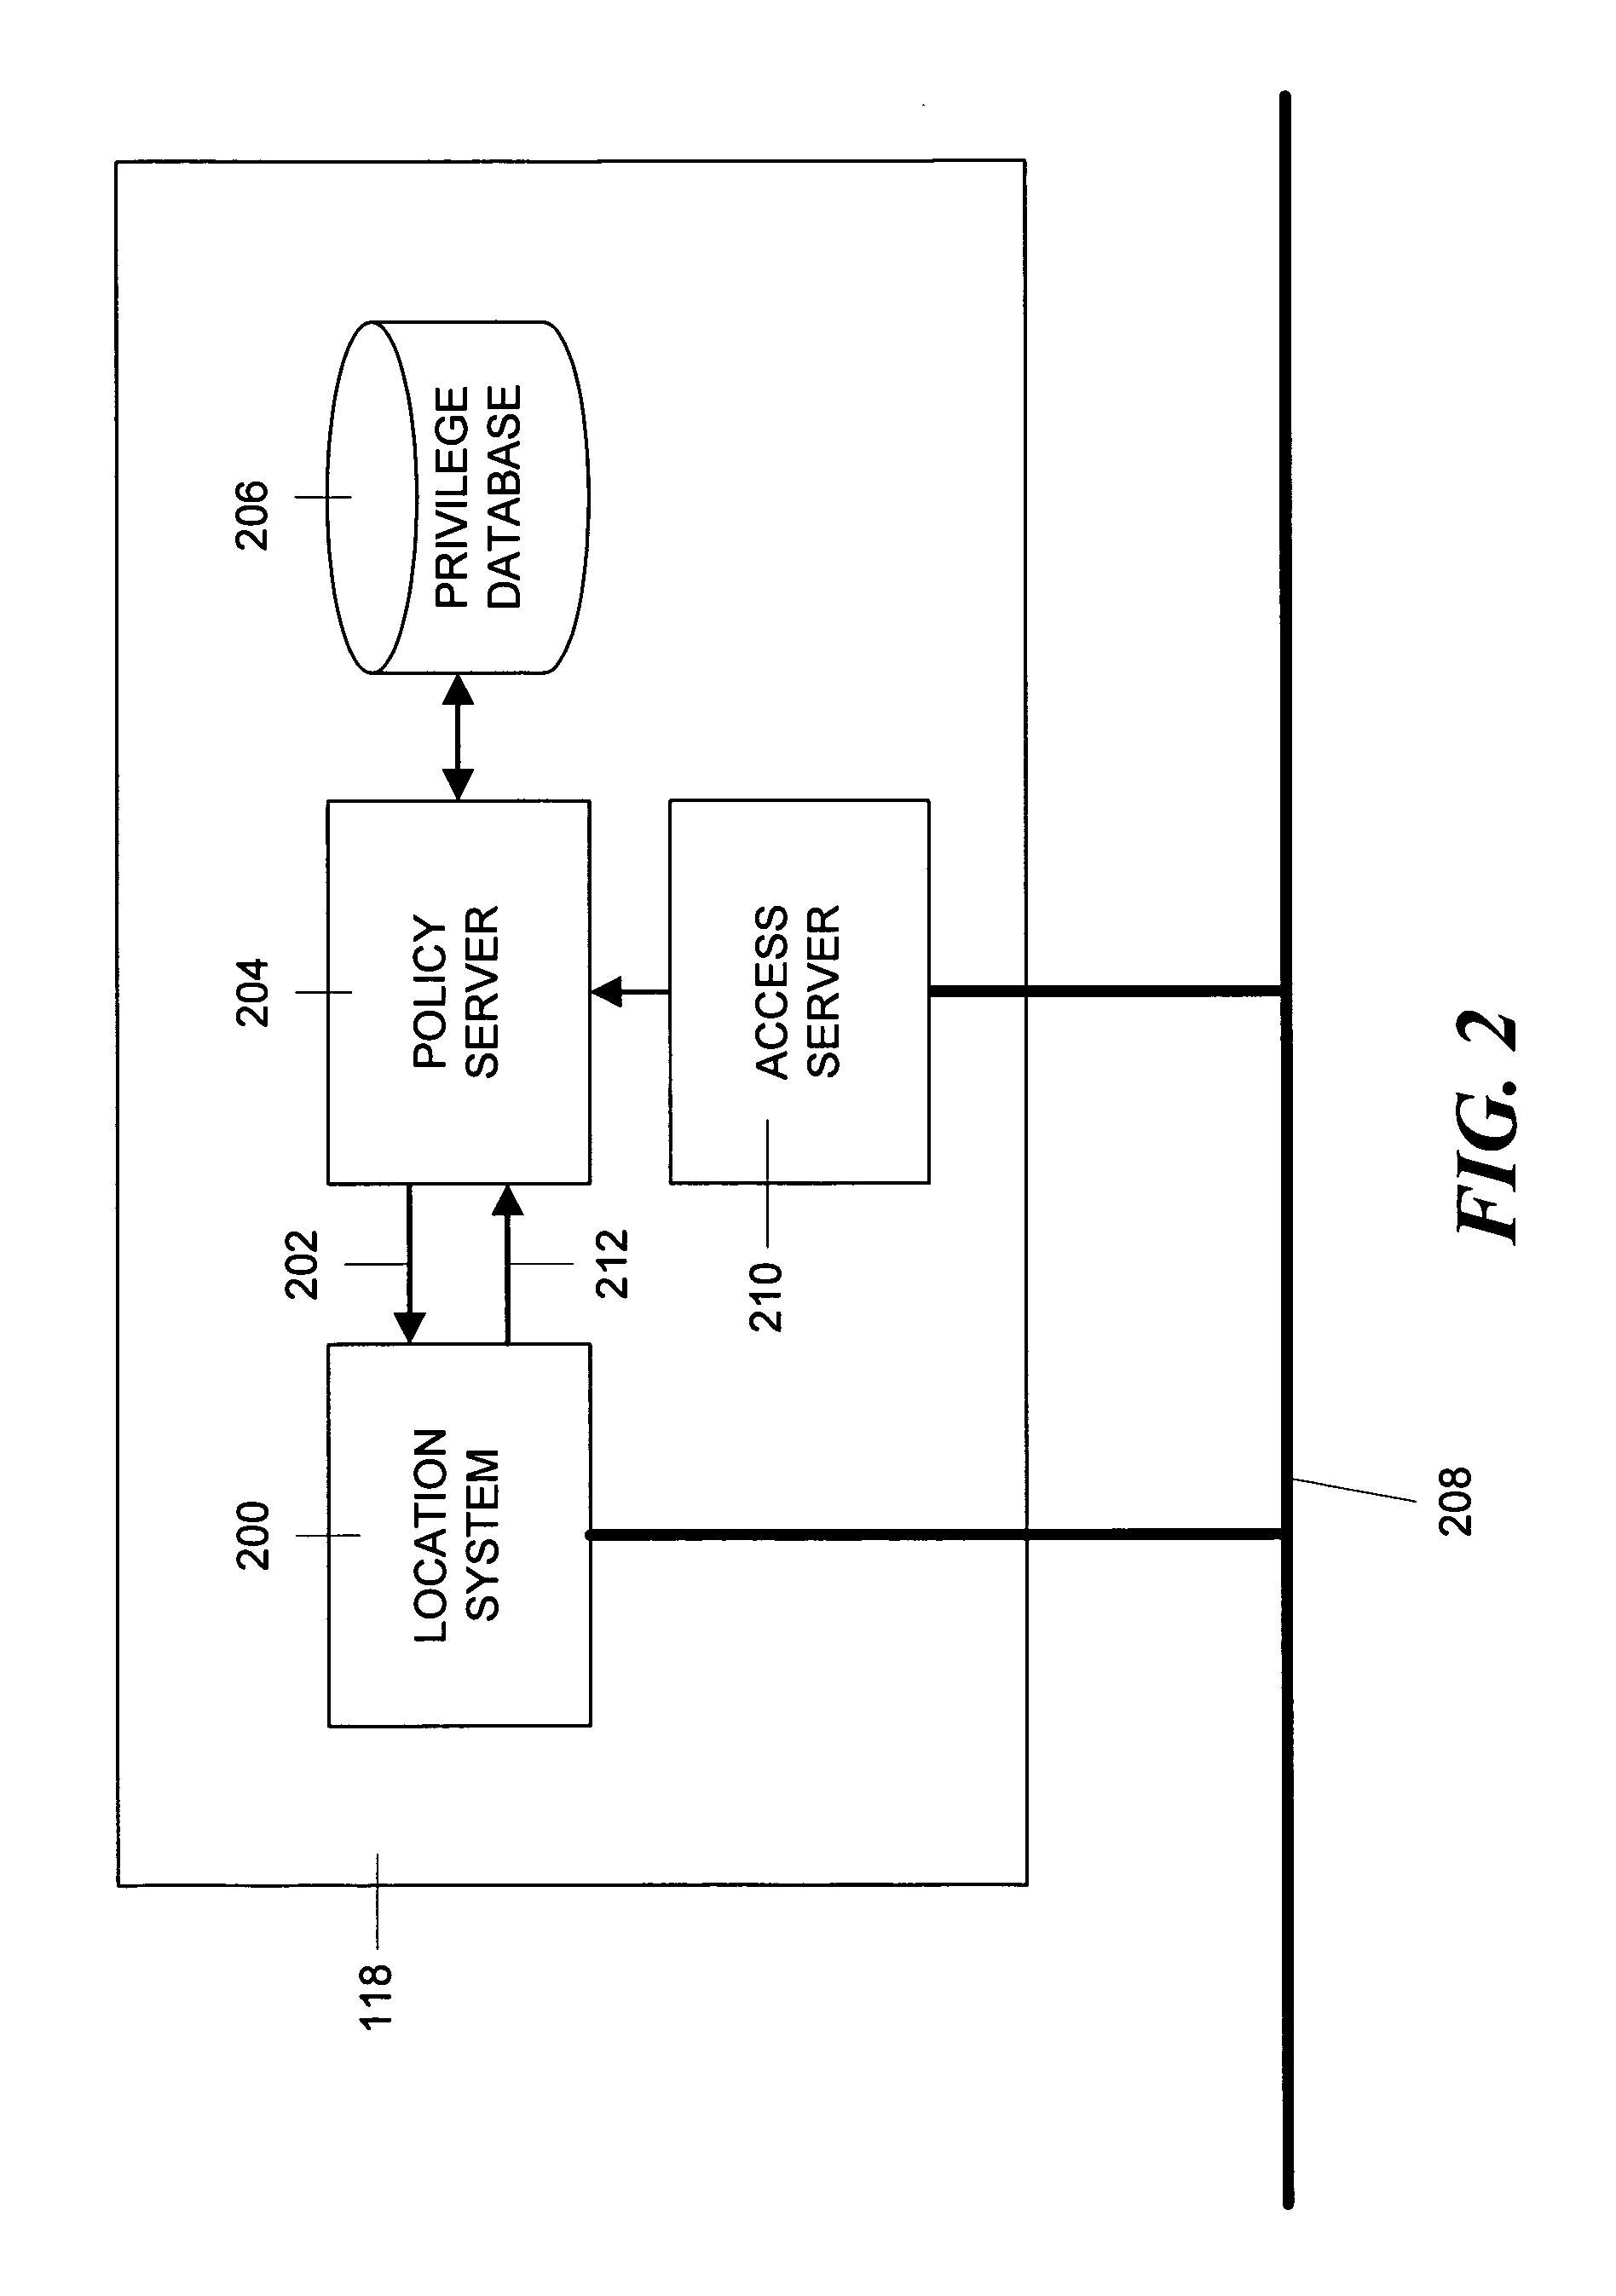 Method and apparatus for controlling wireless network access privileges based on wireless client location